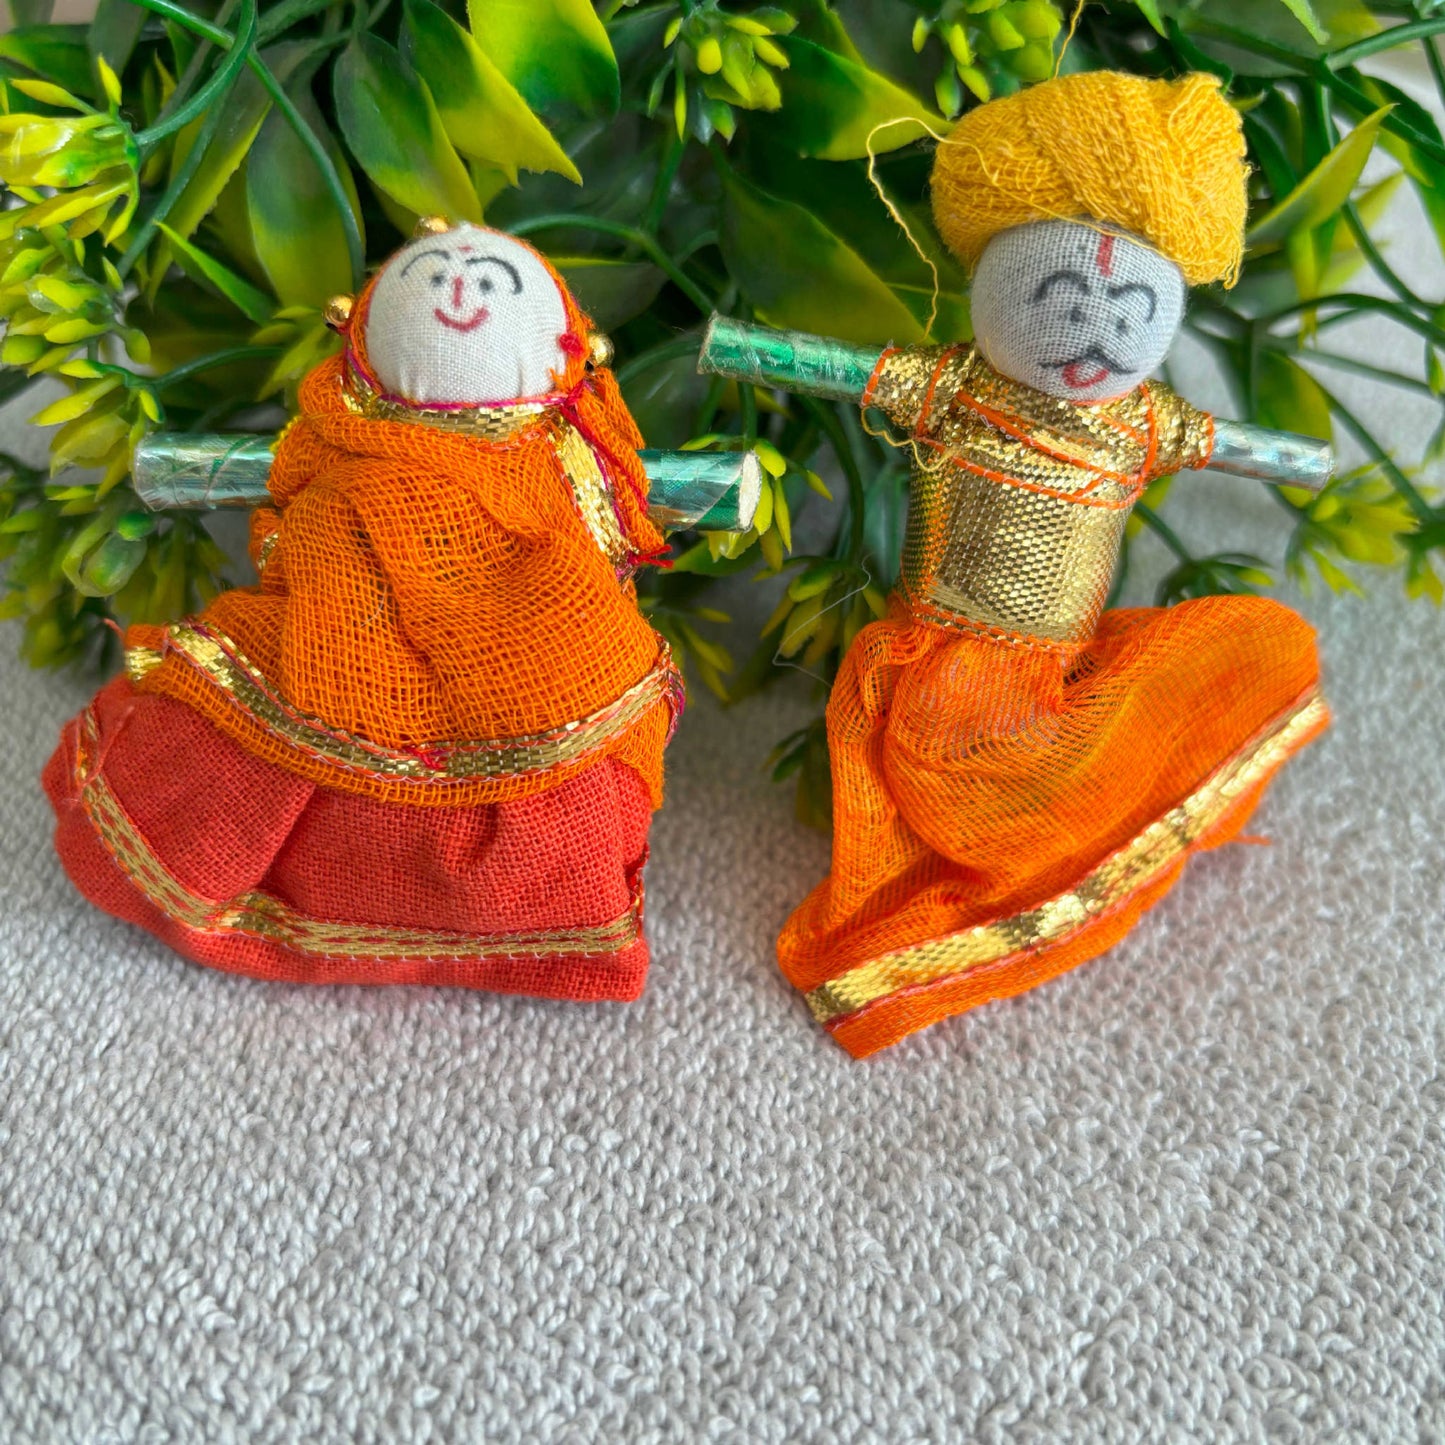 Exquisite Handcrafted Decorative Dolls Pair - Traditional Indian Art 🎨✨